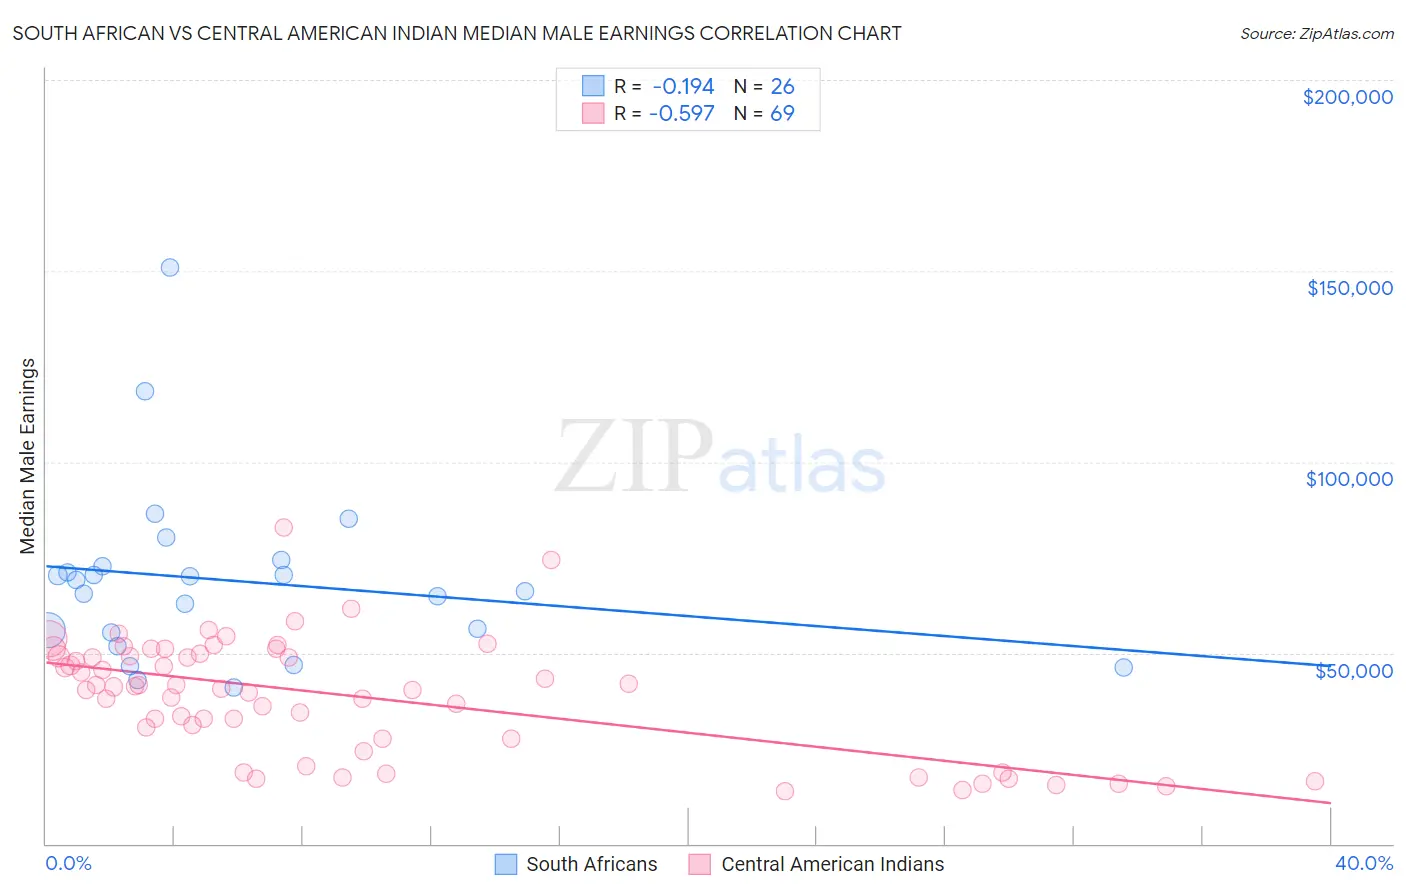 South African vs Central American Indian Median Male Earnings